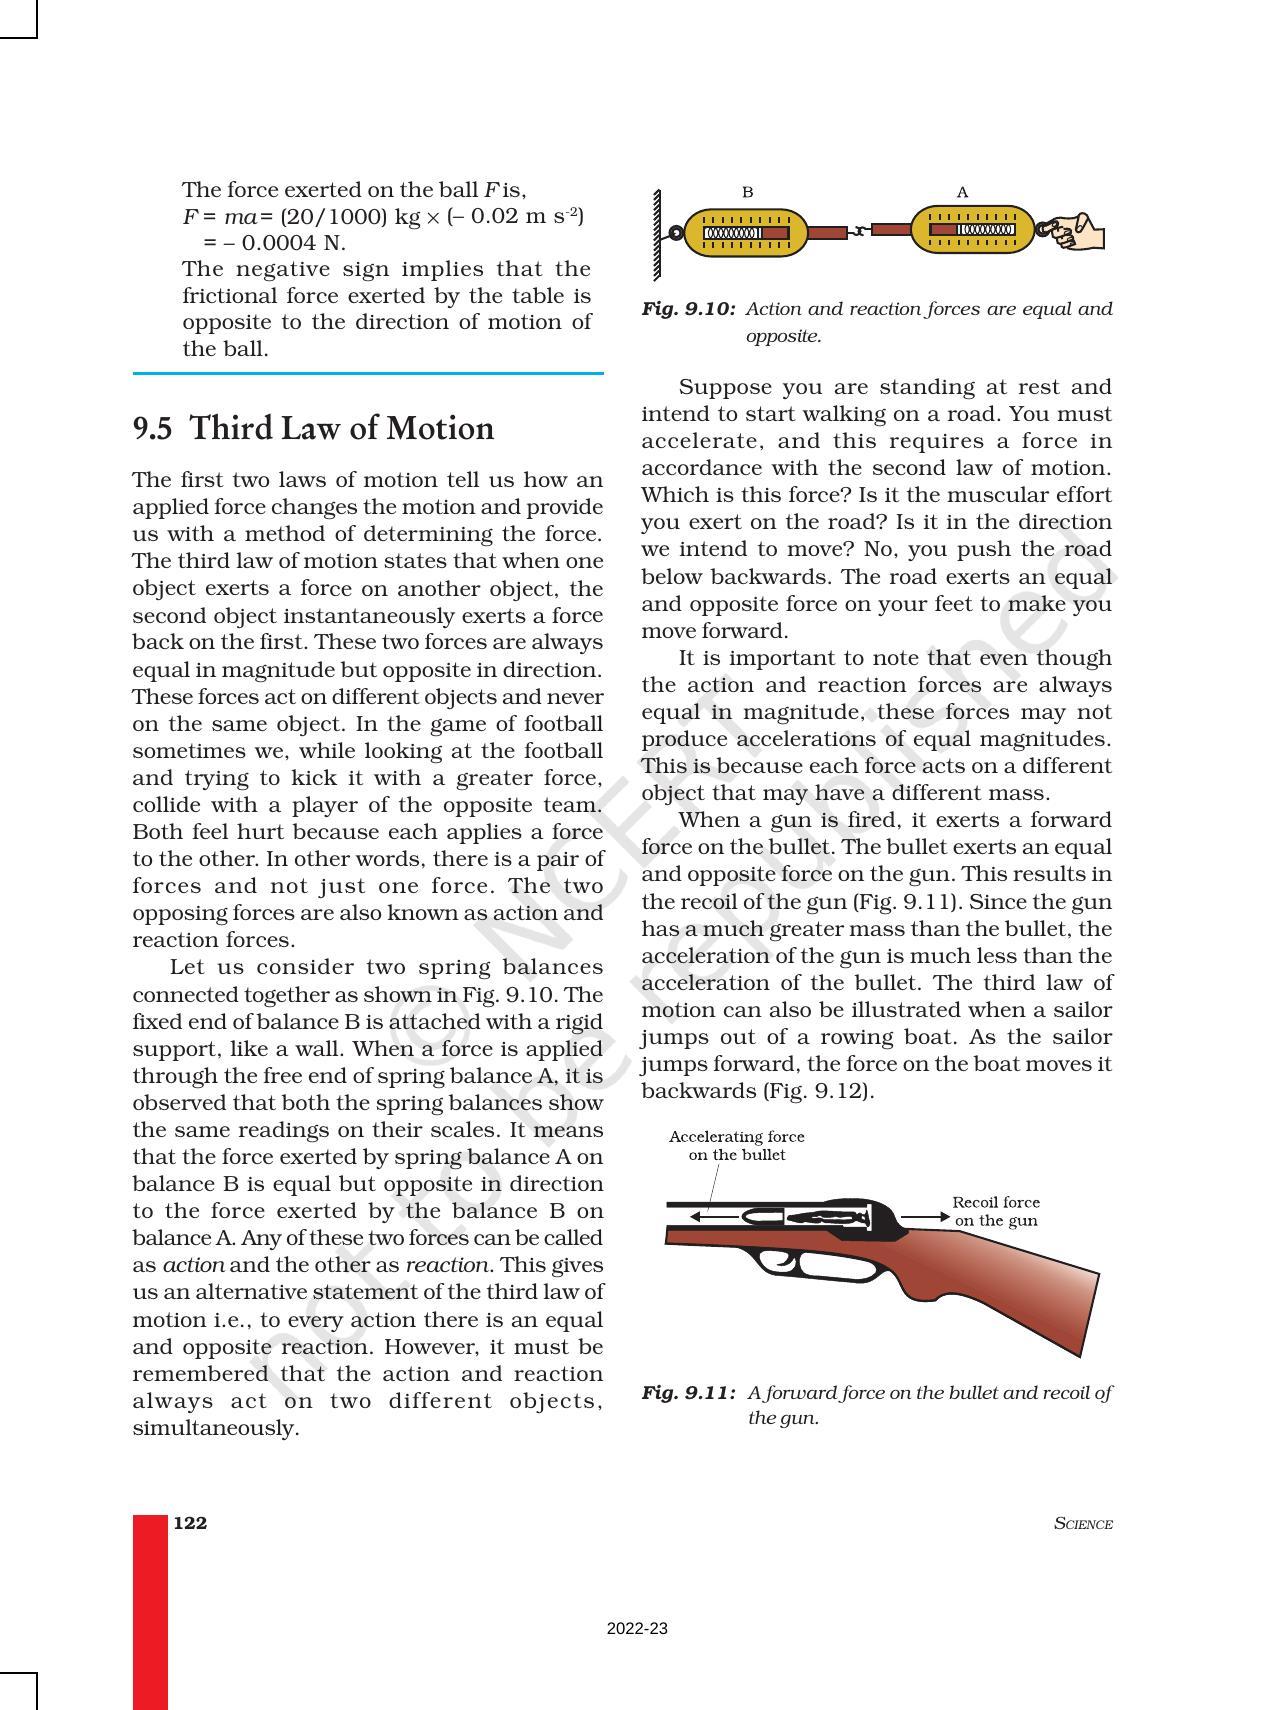 NCERT Book for Class 9 Science Chapter 9 Force And Laws Of Motion - Page 9